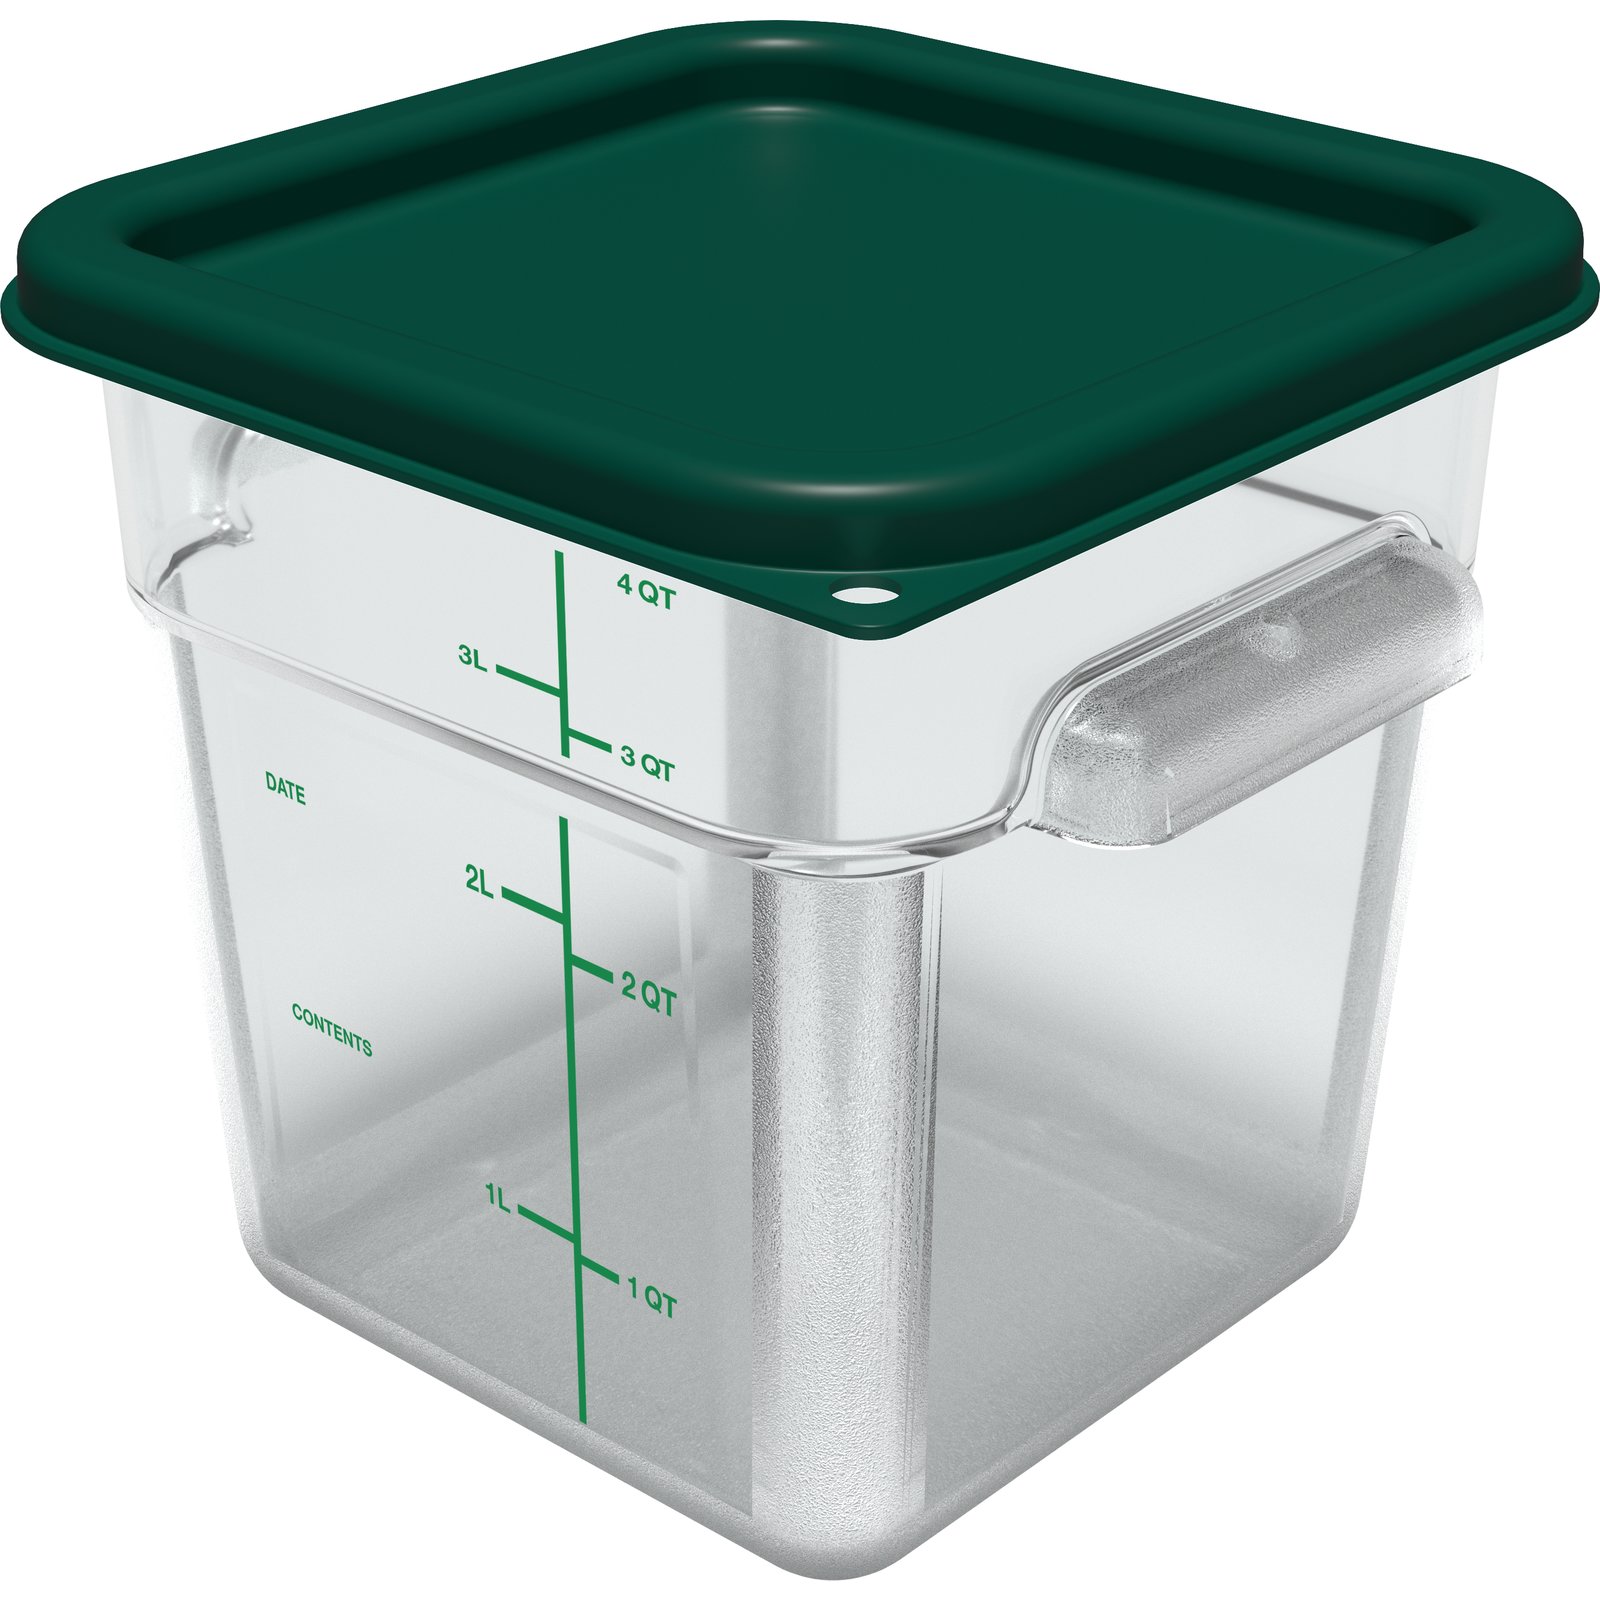 The Container Store 1 qt. Rectangular Food Storage - Crystal Clear - 920 ml. 7 x 5 x 2-1/4 H - Each